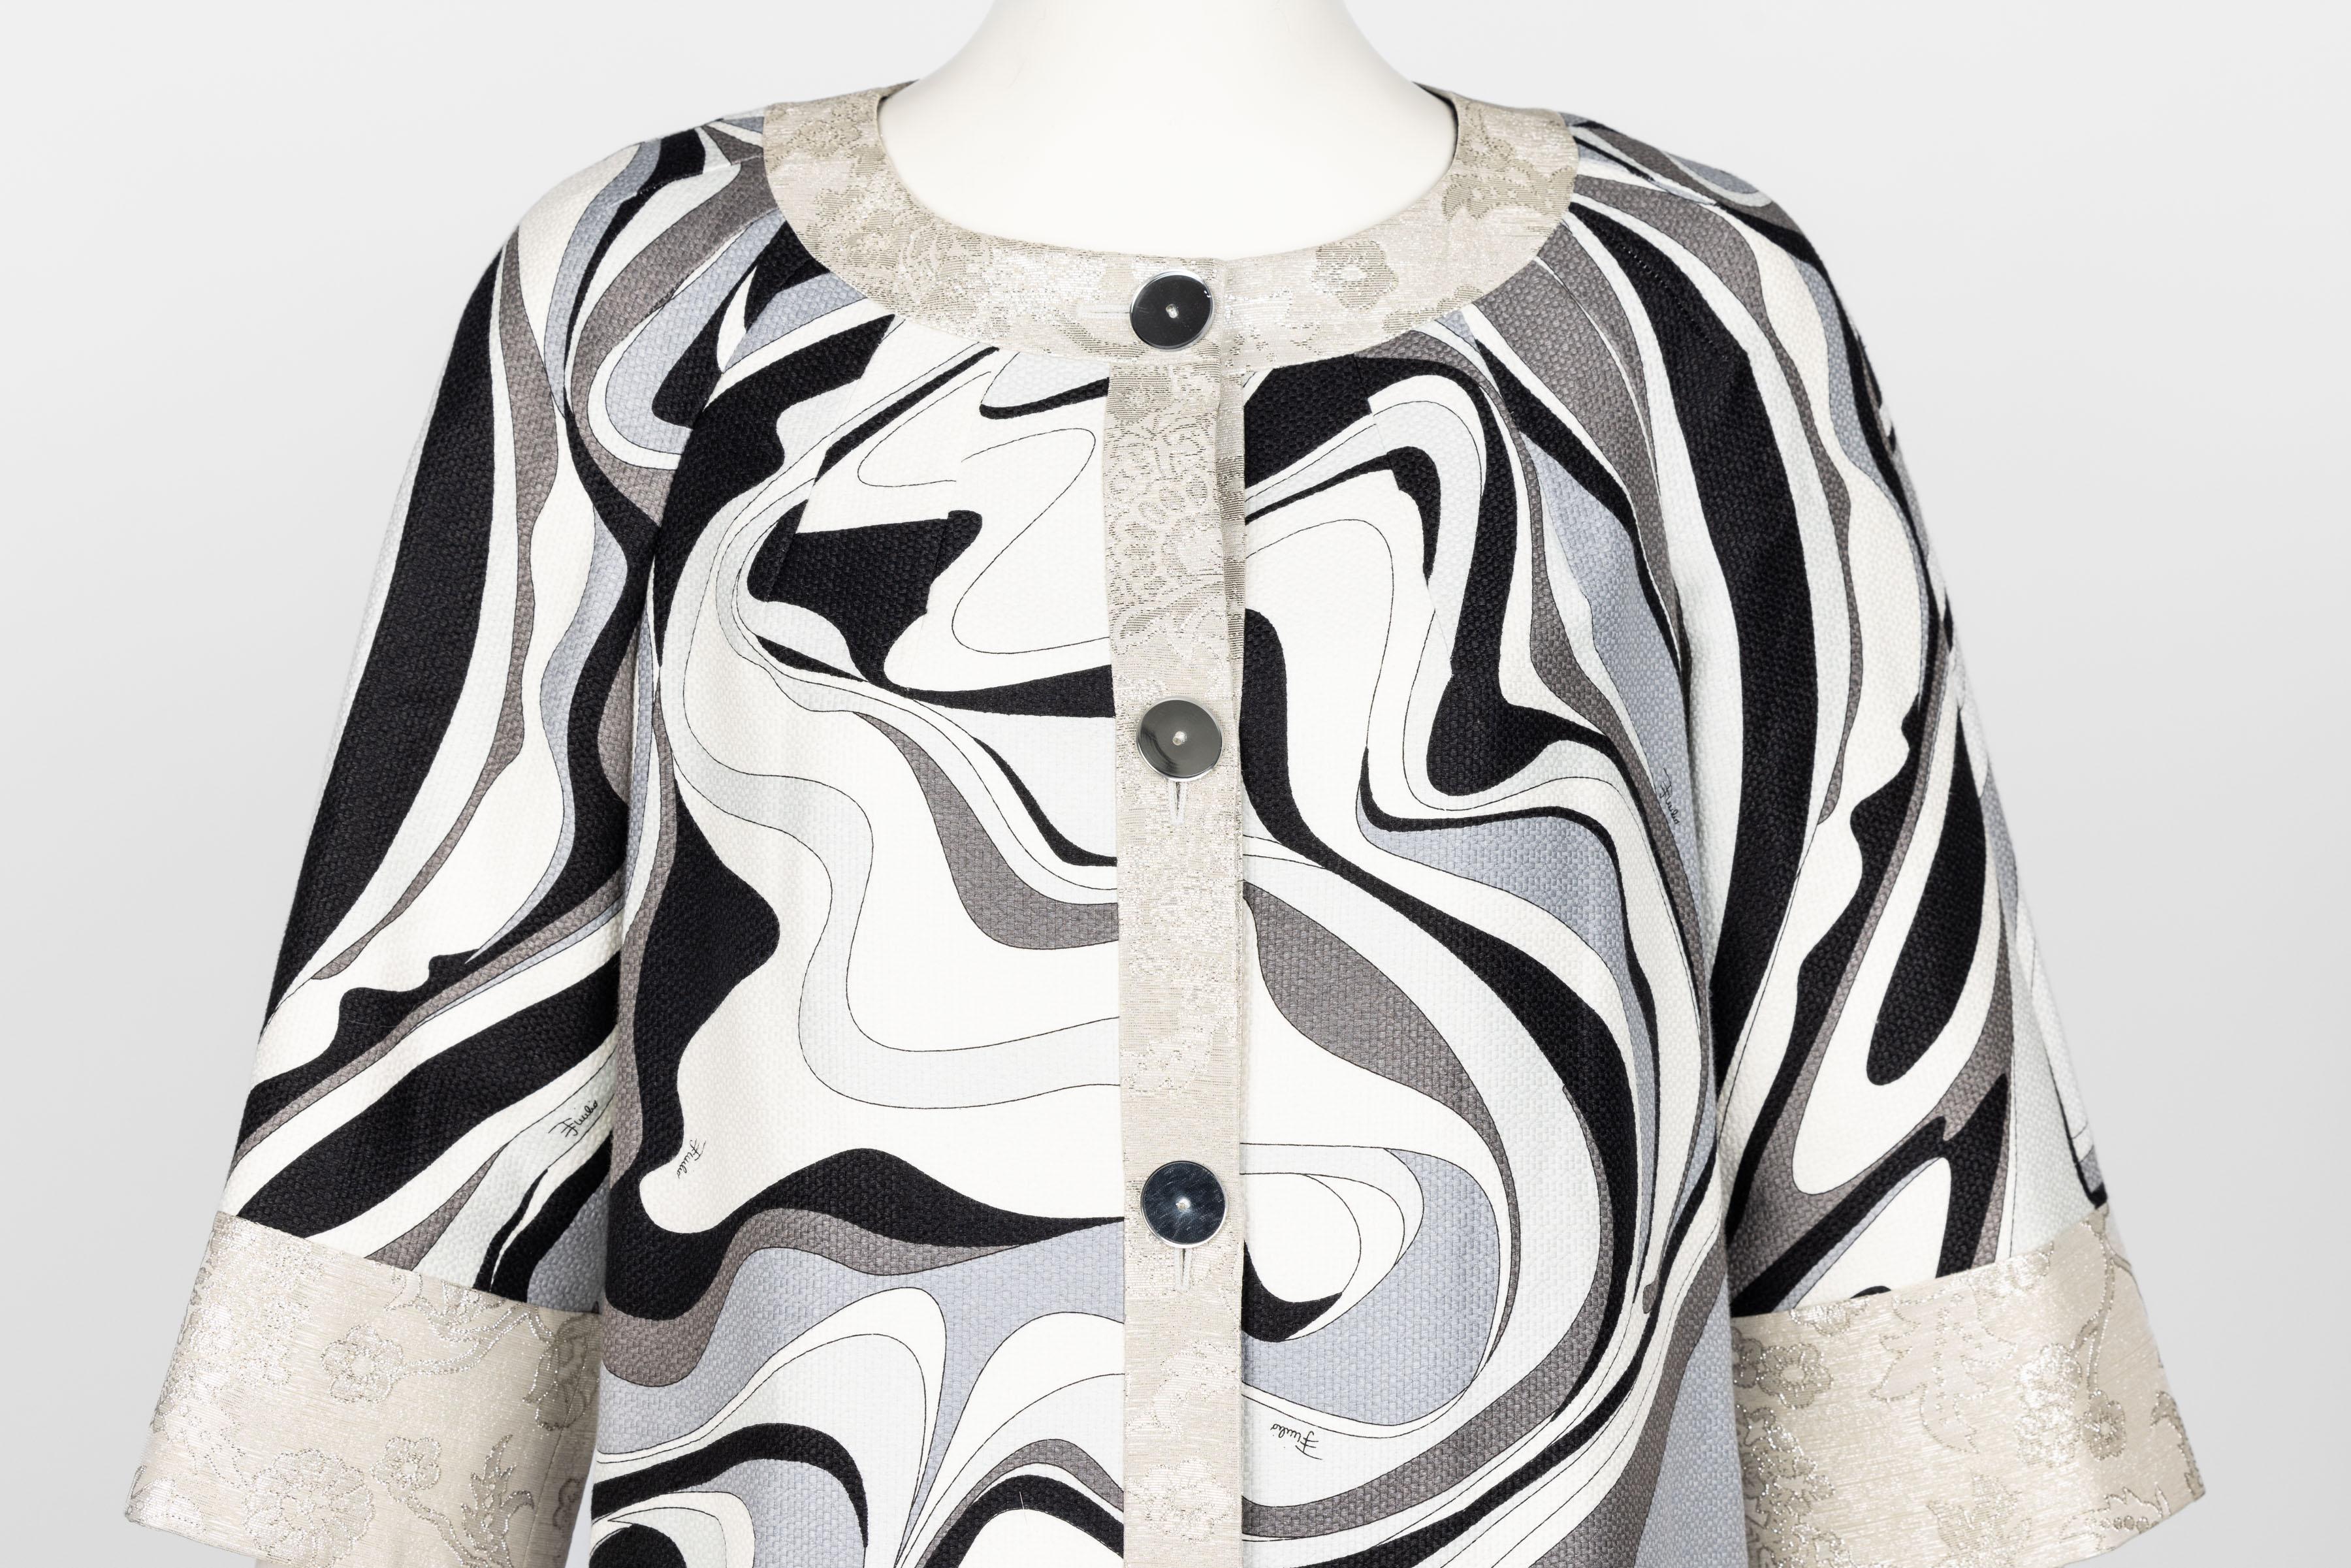 Emilio Pucci Silver Black Print Spring 2007 Runway Evening Coat For Sale 3